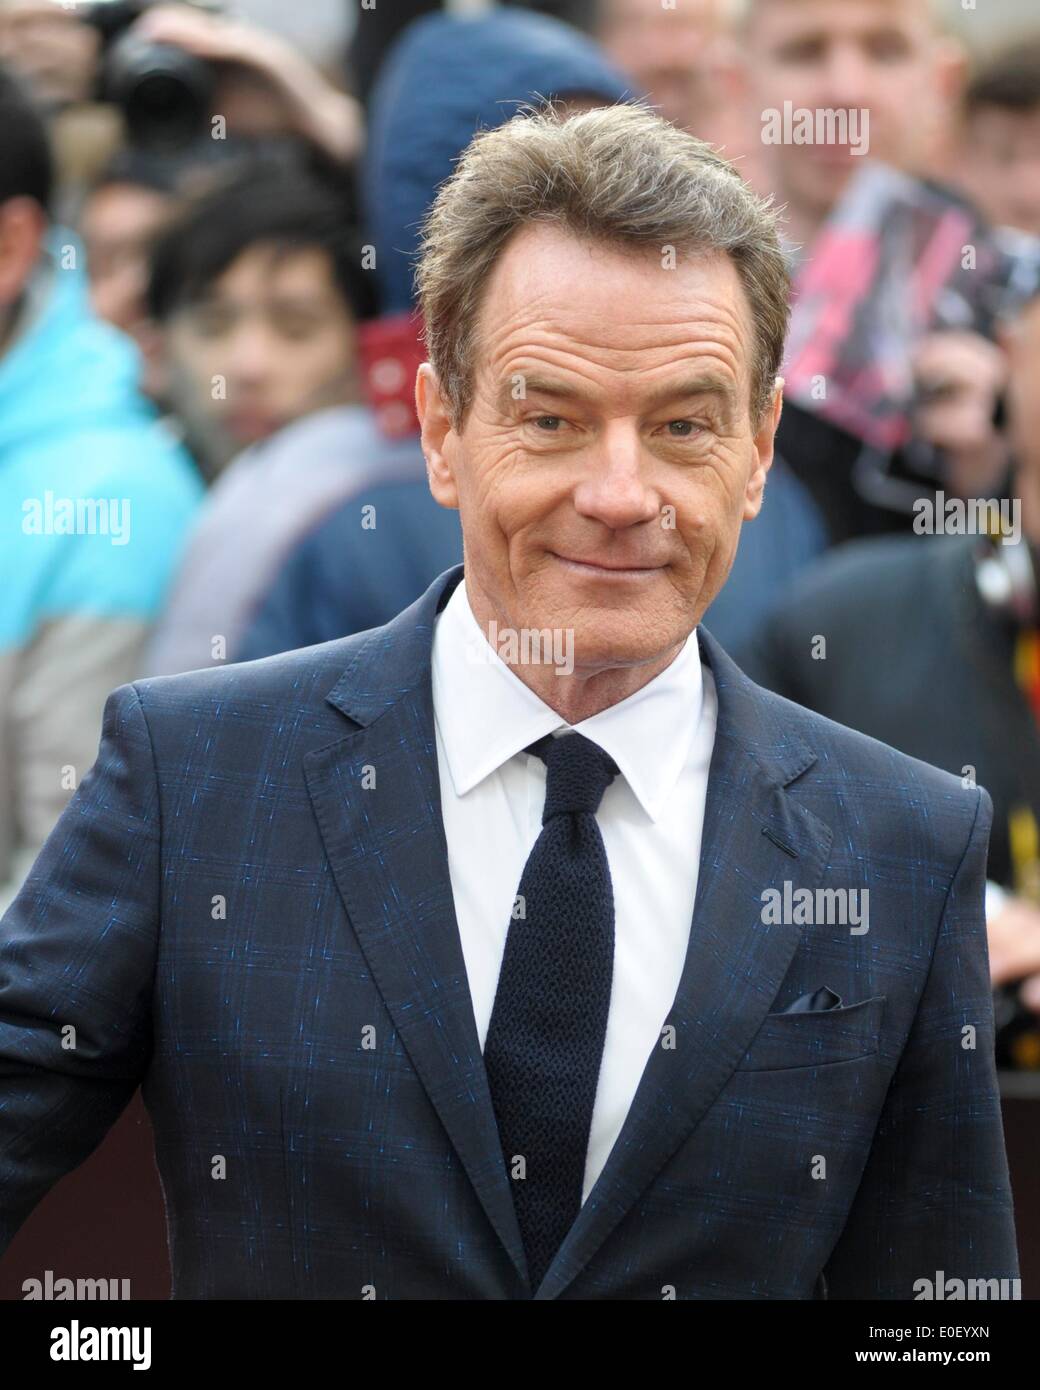 Lead Actor Bryan Cranston attends the GODZILLA EUROPEAN PREMIERE on 11/05/2014 at ODEON Leicester Square, London. Persons pictured: Bryan Cranston. Picture by Julie Edwards Stock Photo